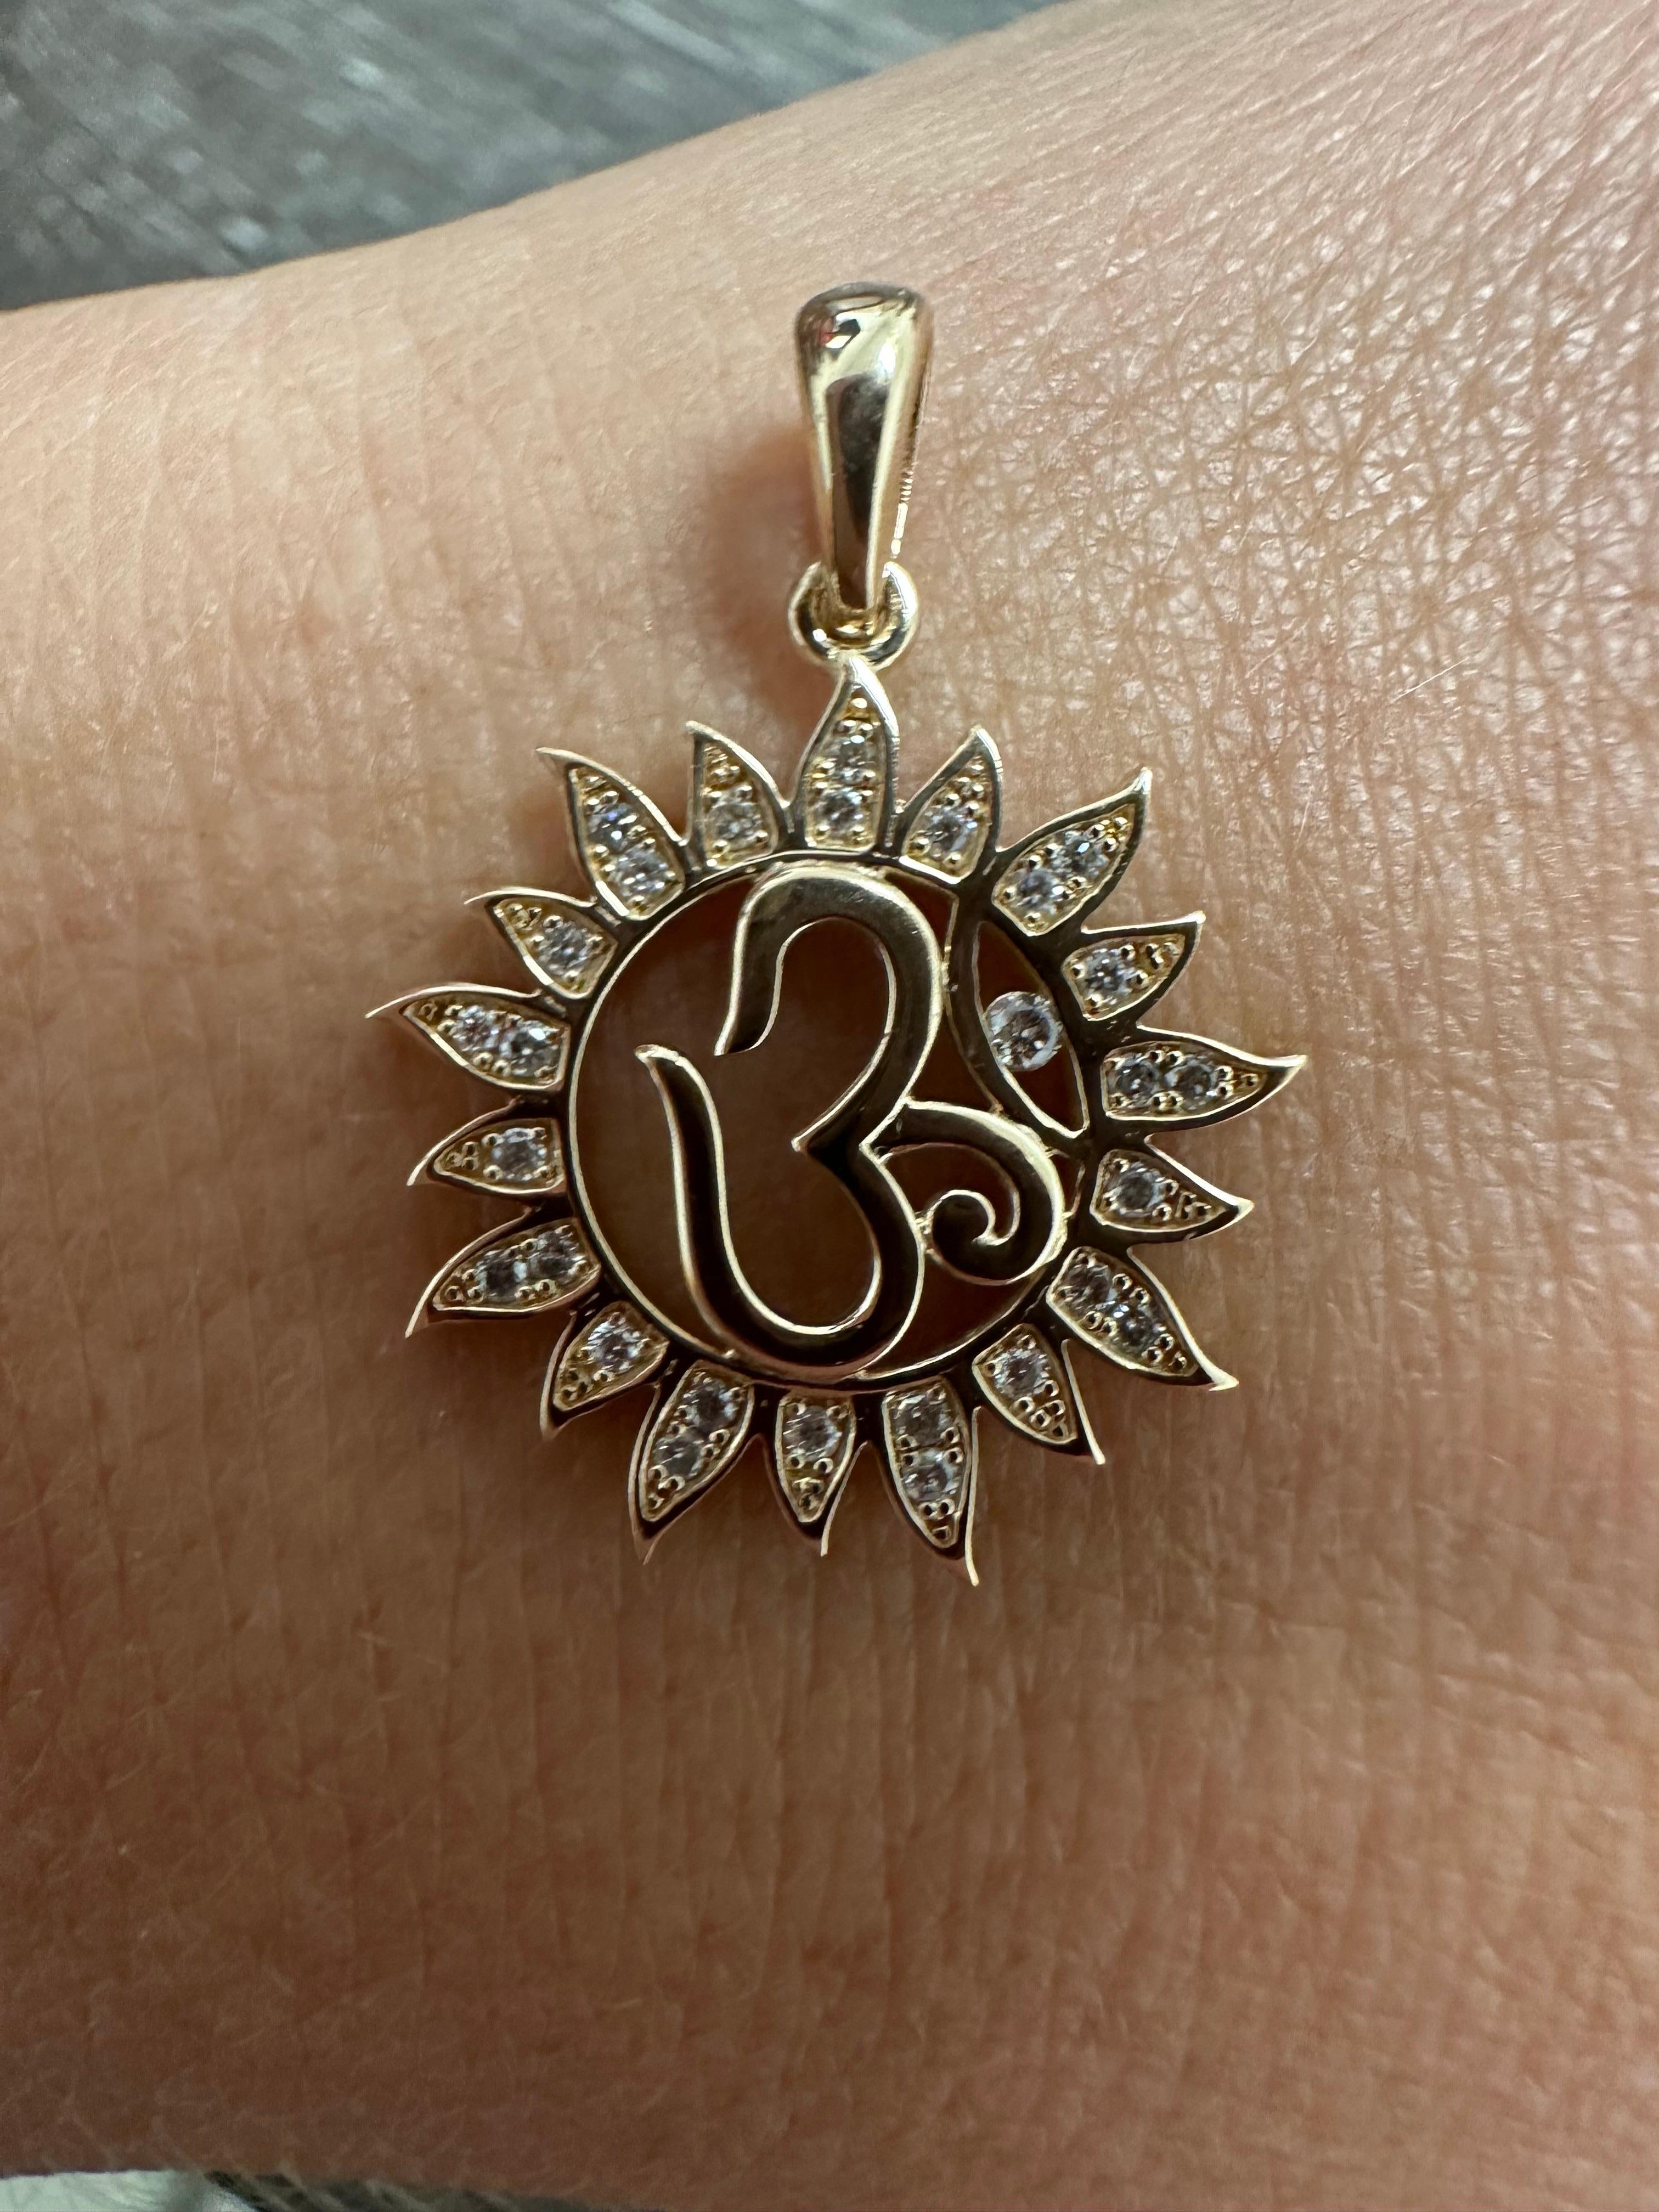 Natural diamond pendant 0.75ct of fine diamonds in OM pendant in 14KT yellow gold. This pendant will come with a beautiful box and certificate of authenticity, it will take 7 days before it ships out.

Certificate of authenticity comes with